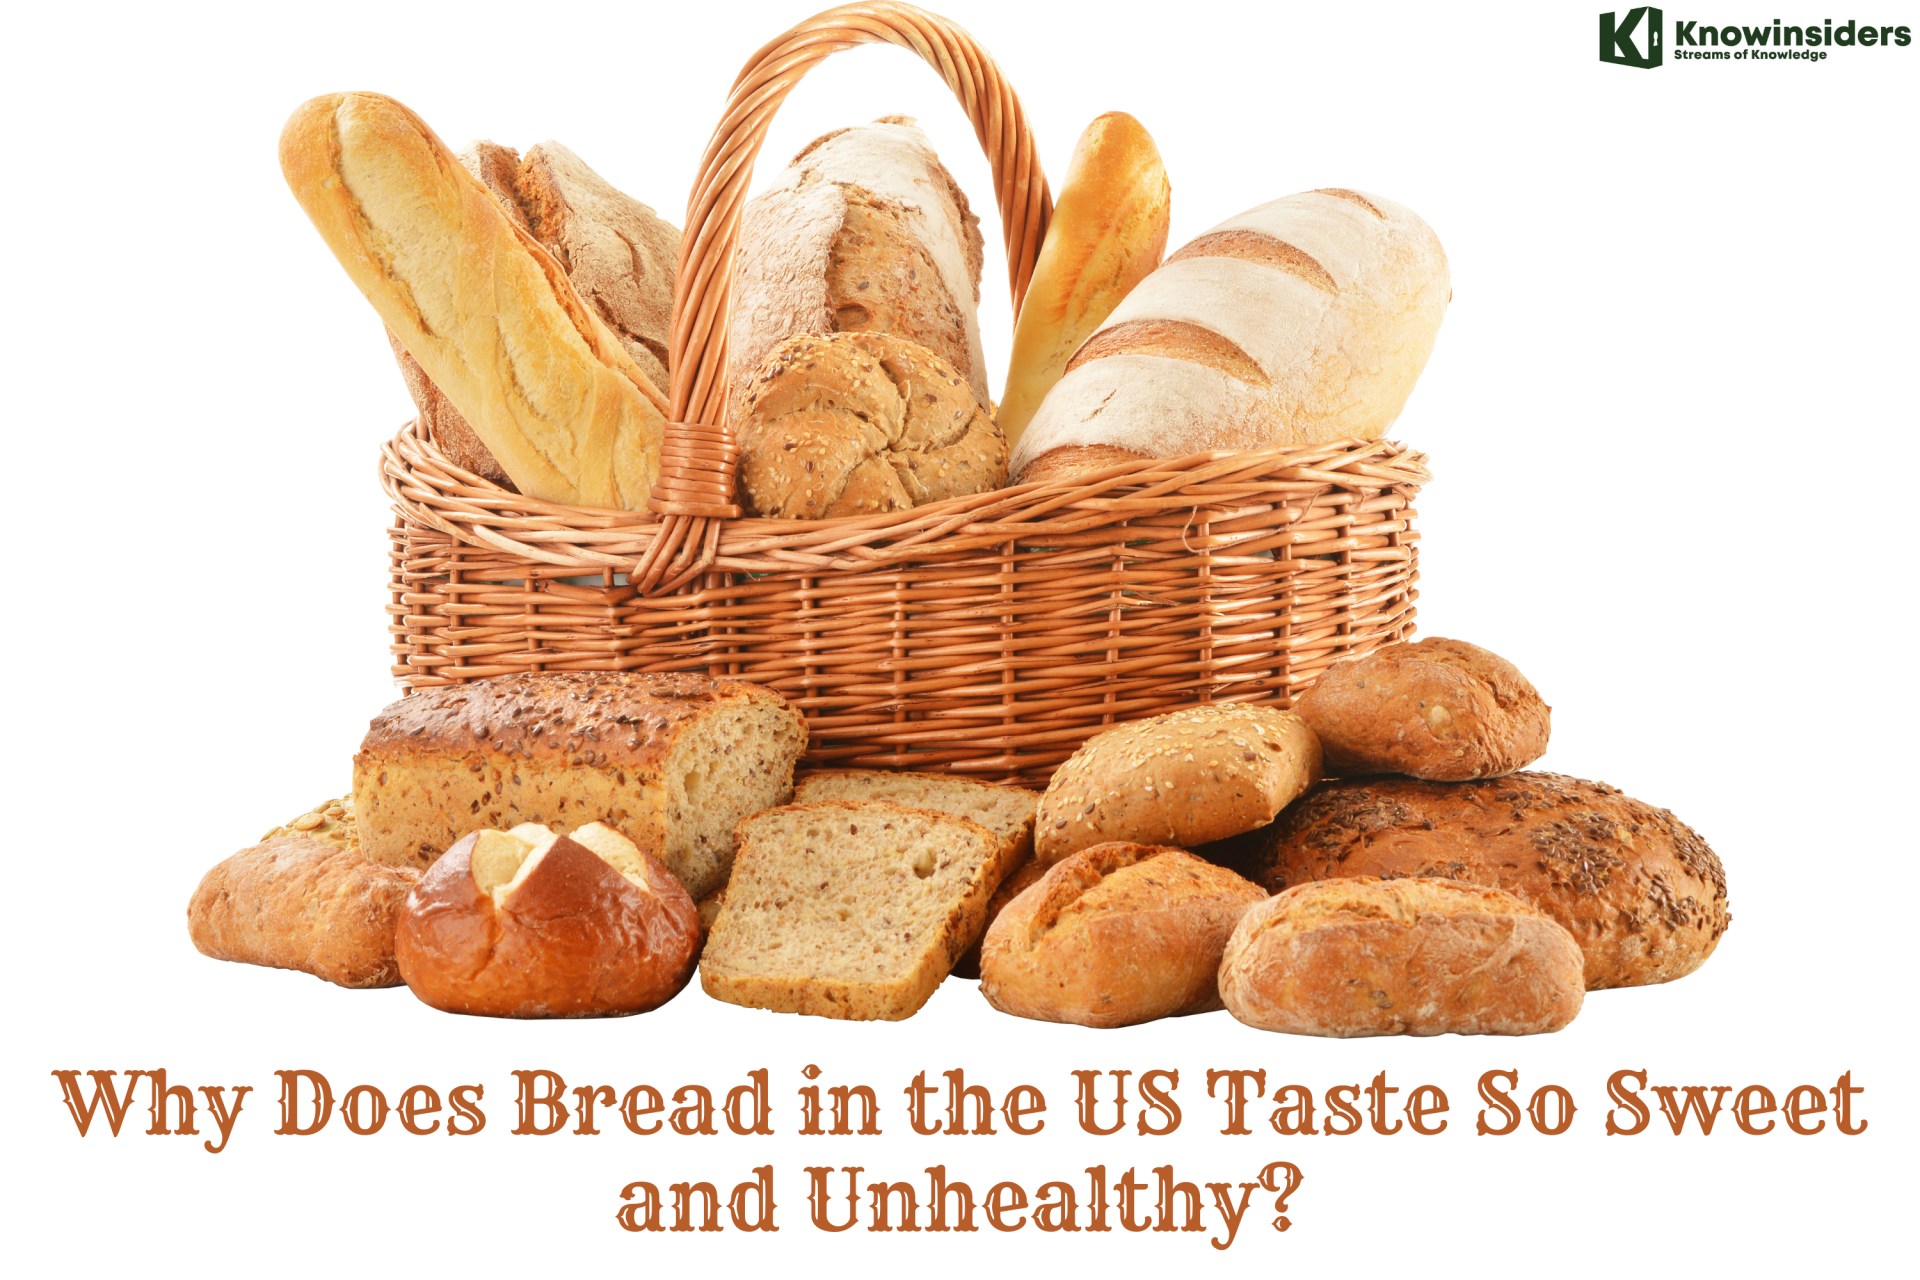 Why Does Bread in the US Taste So Sweet and Unhealthy?